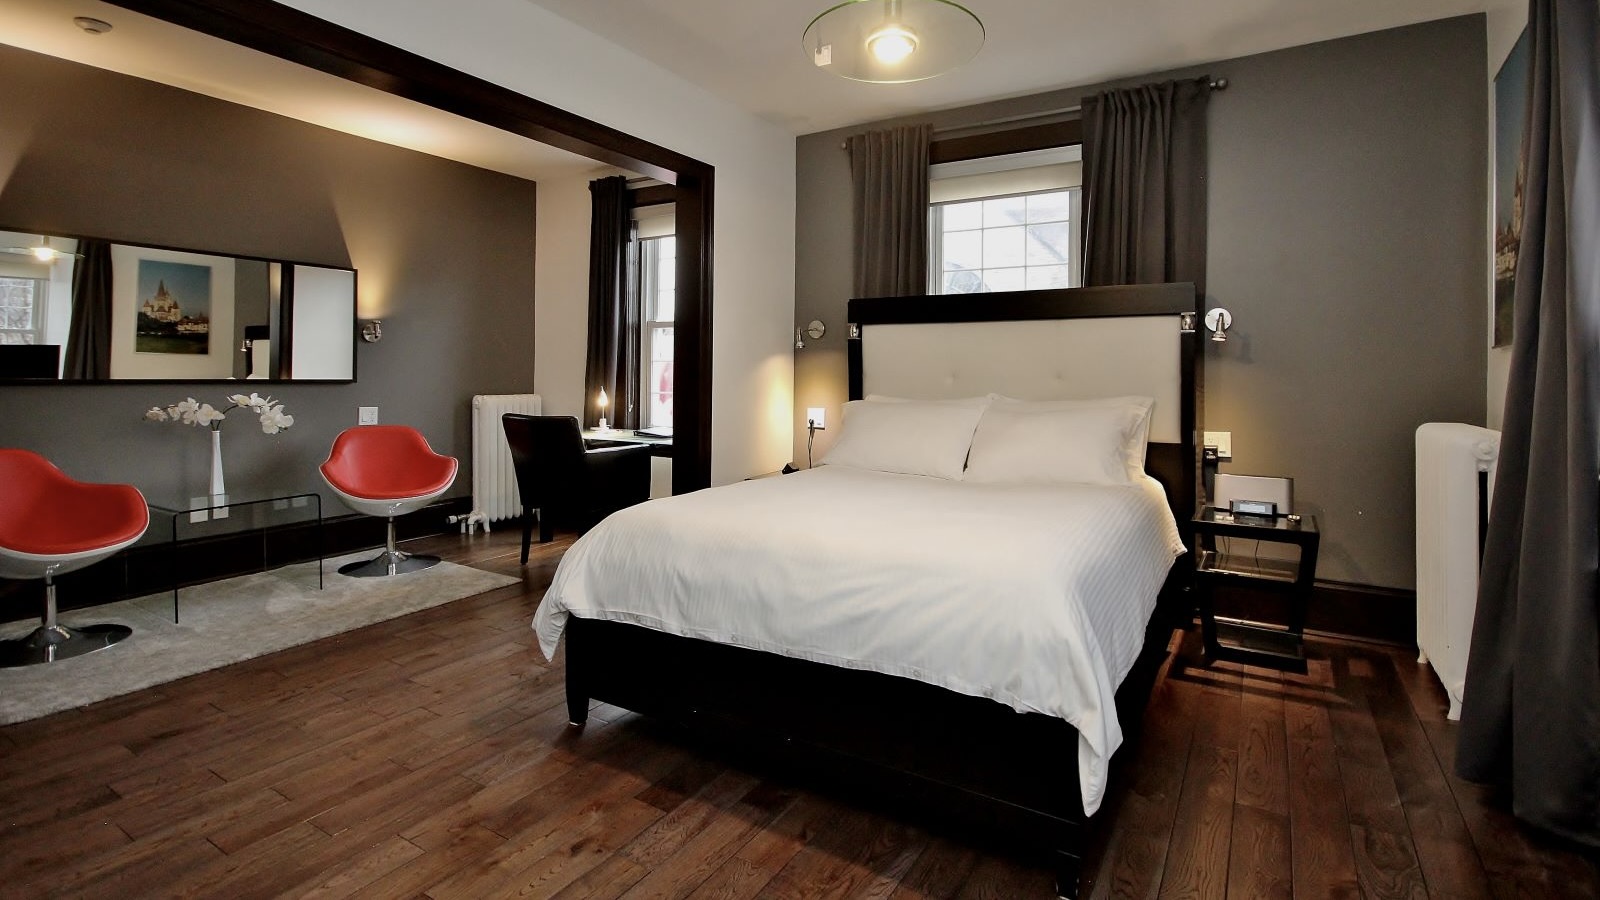 Queen-Suite-with-Fireplace Swiss Hotel Ottawa one of the best boutique hotels in Ontario